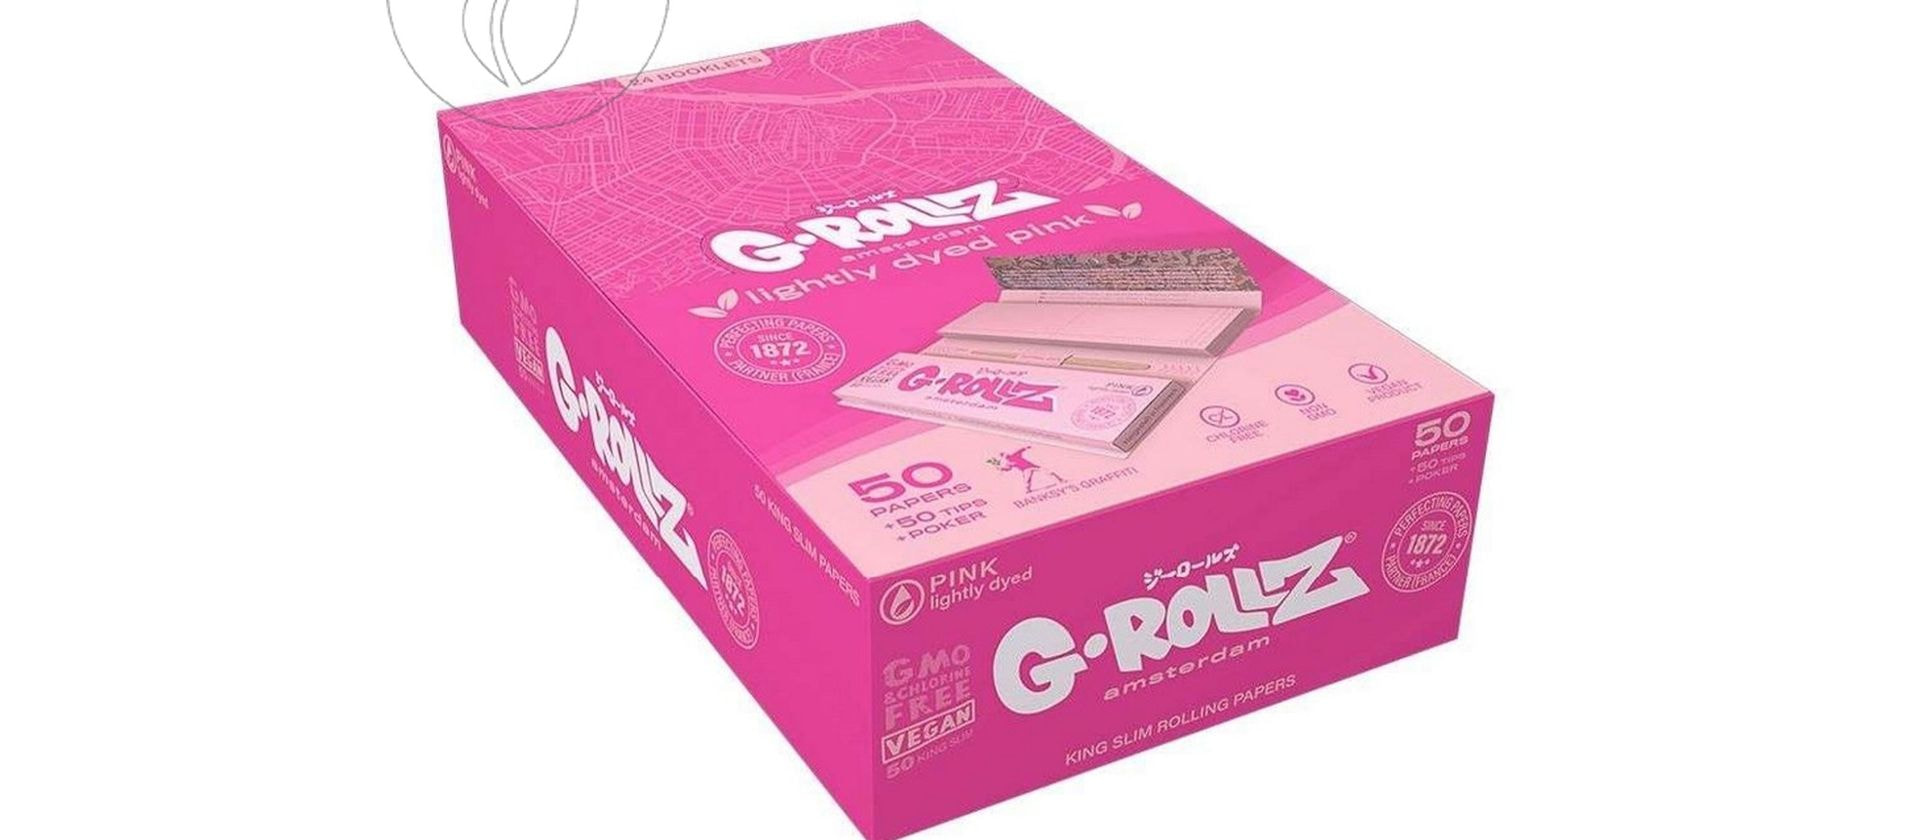 G-Rollz | Banksy's Graffiti Lightly Dyed Pink KingSize Papers + Tips BOX 16 pieces